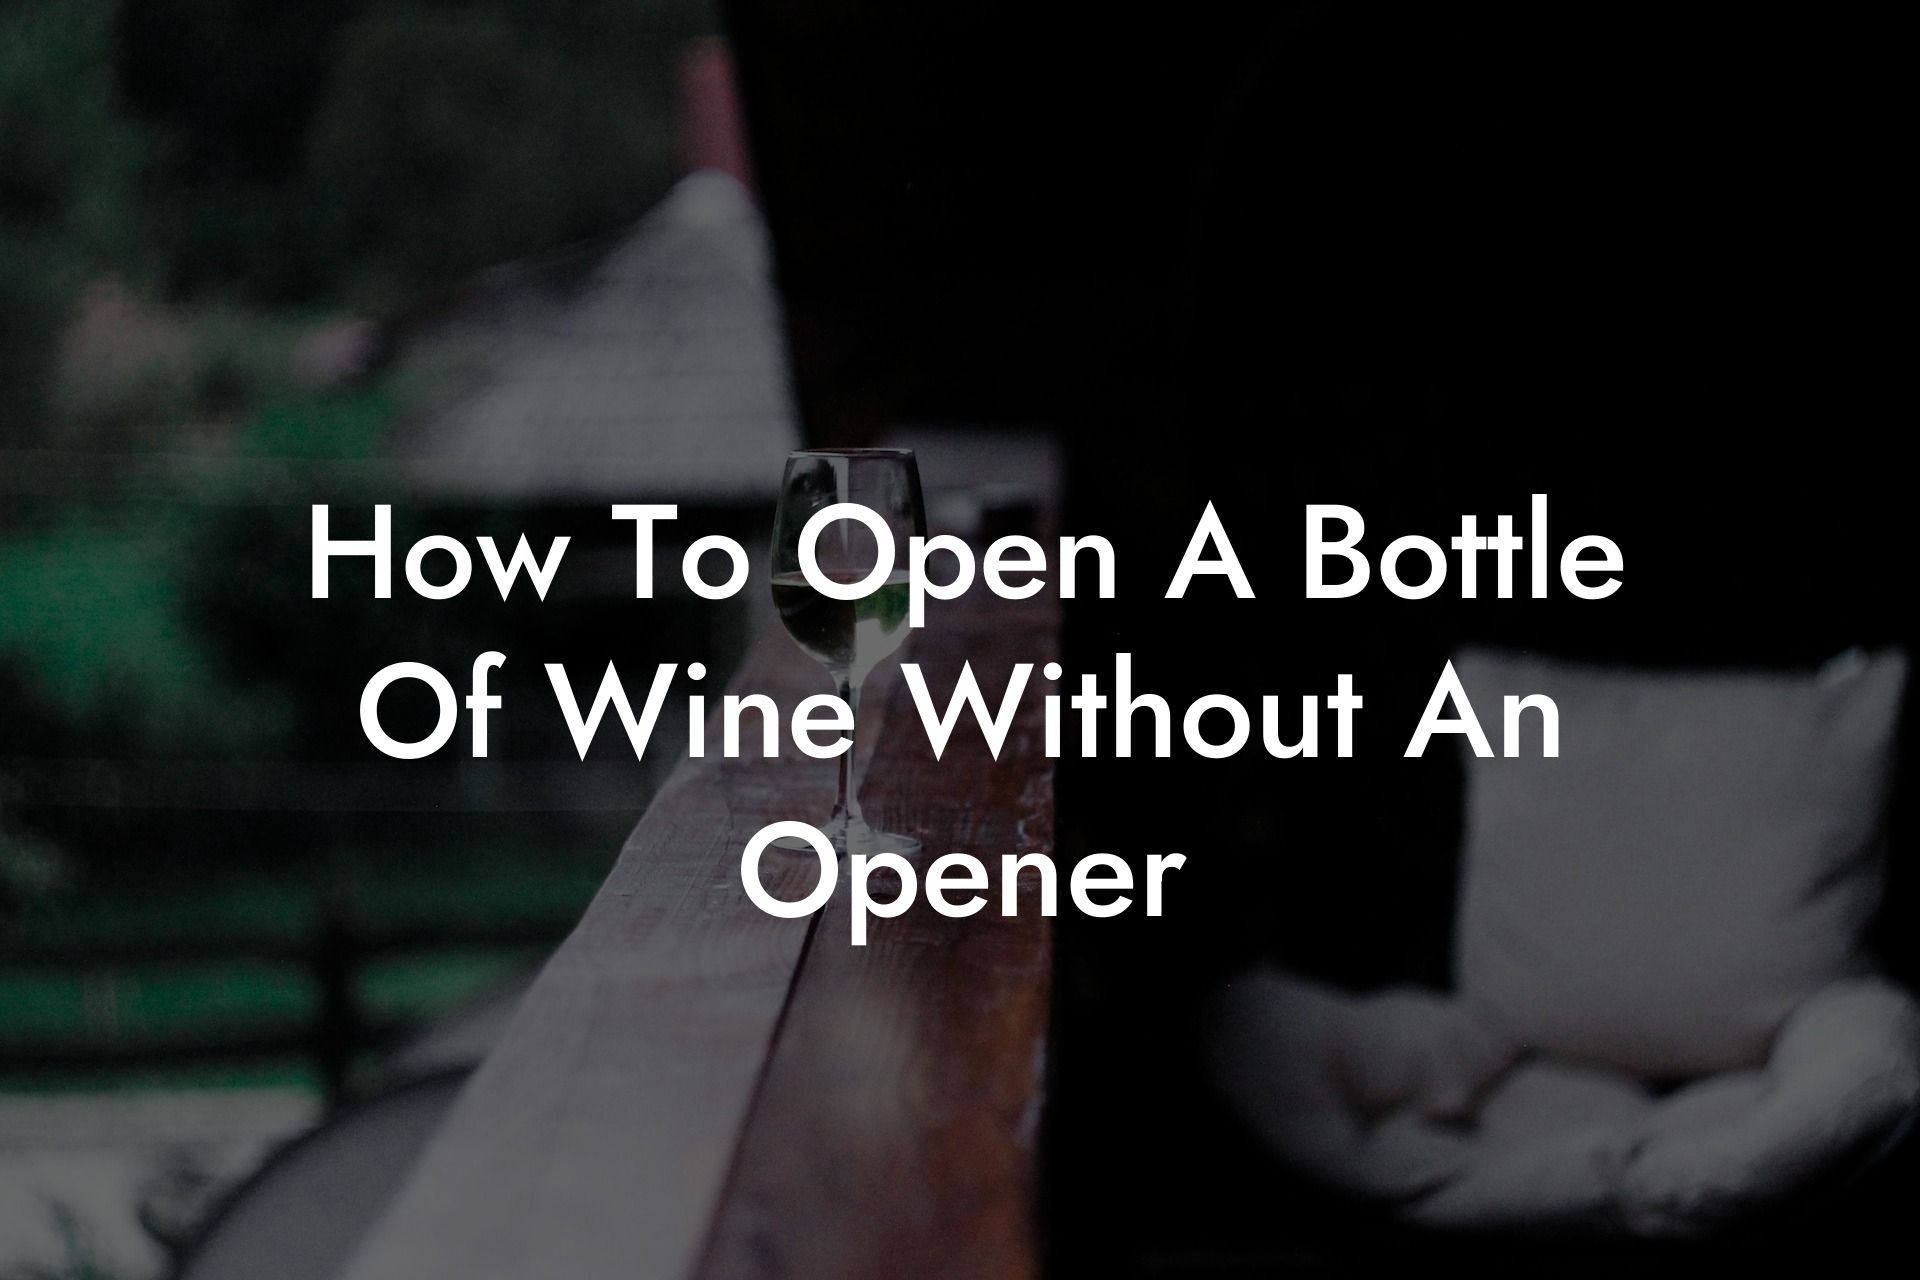 How To Open A Bottle Of Wine Without An Opener